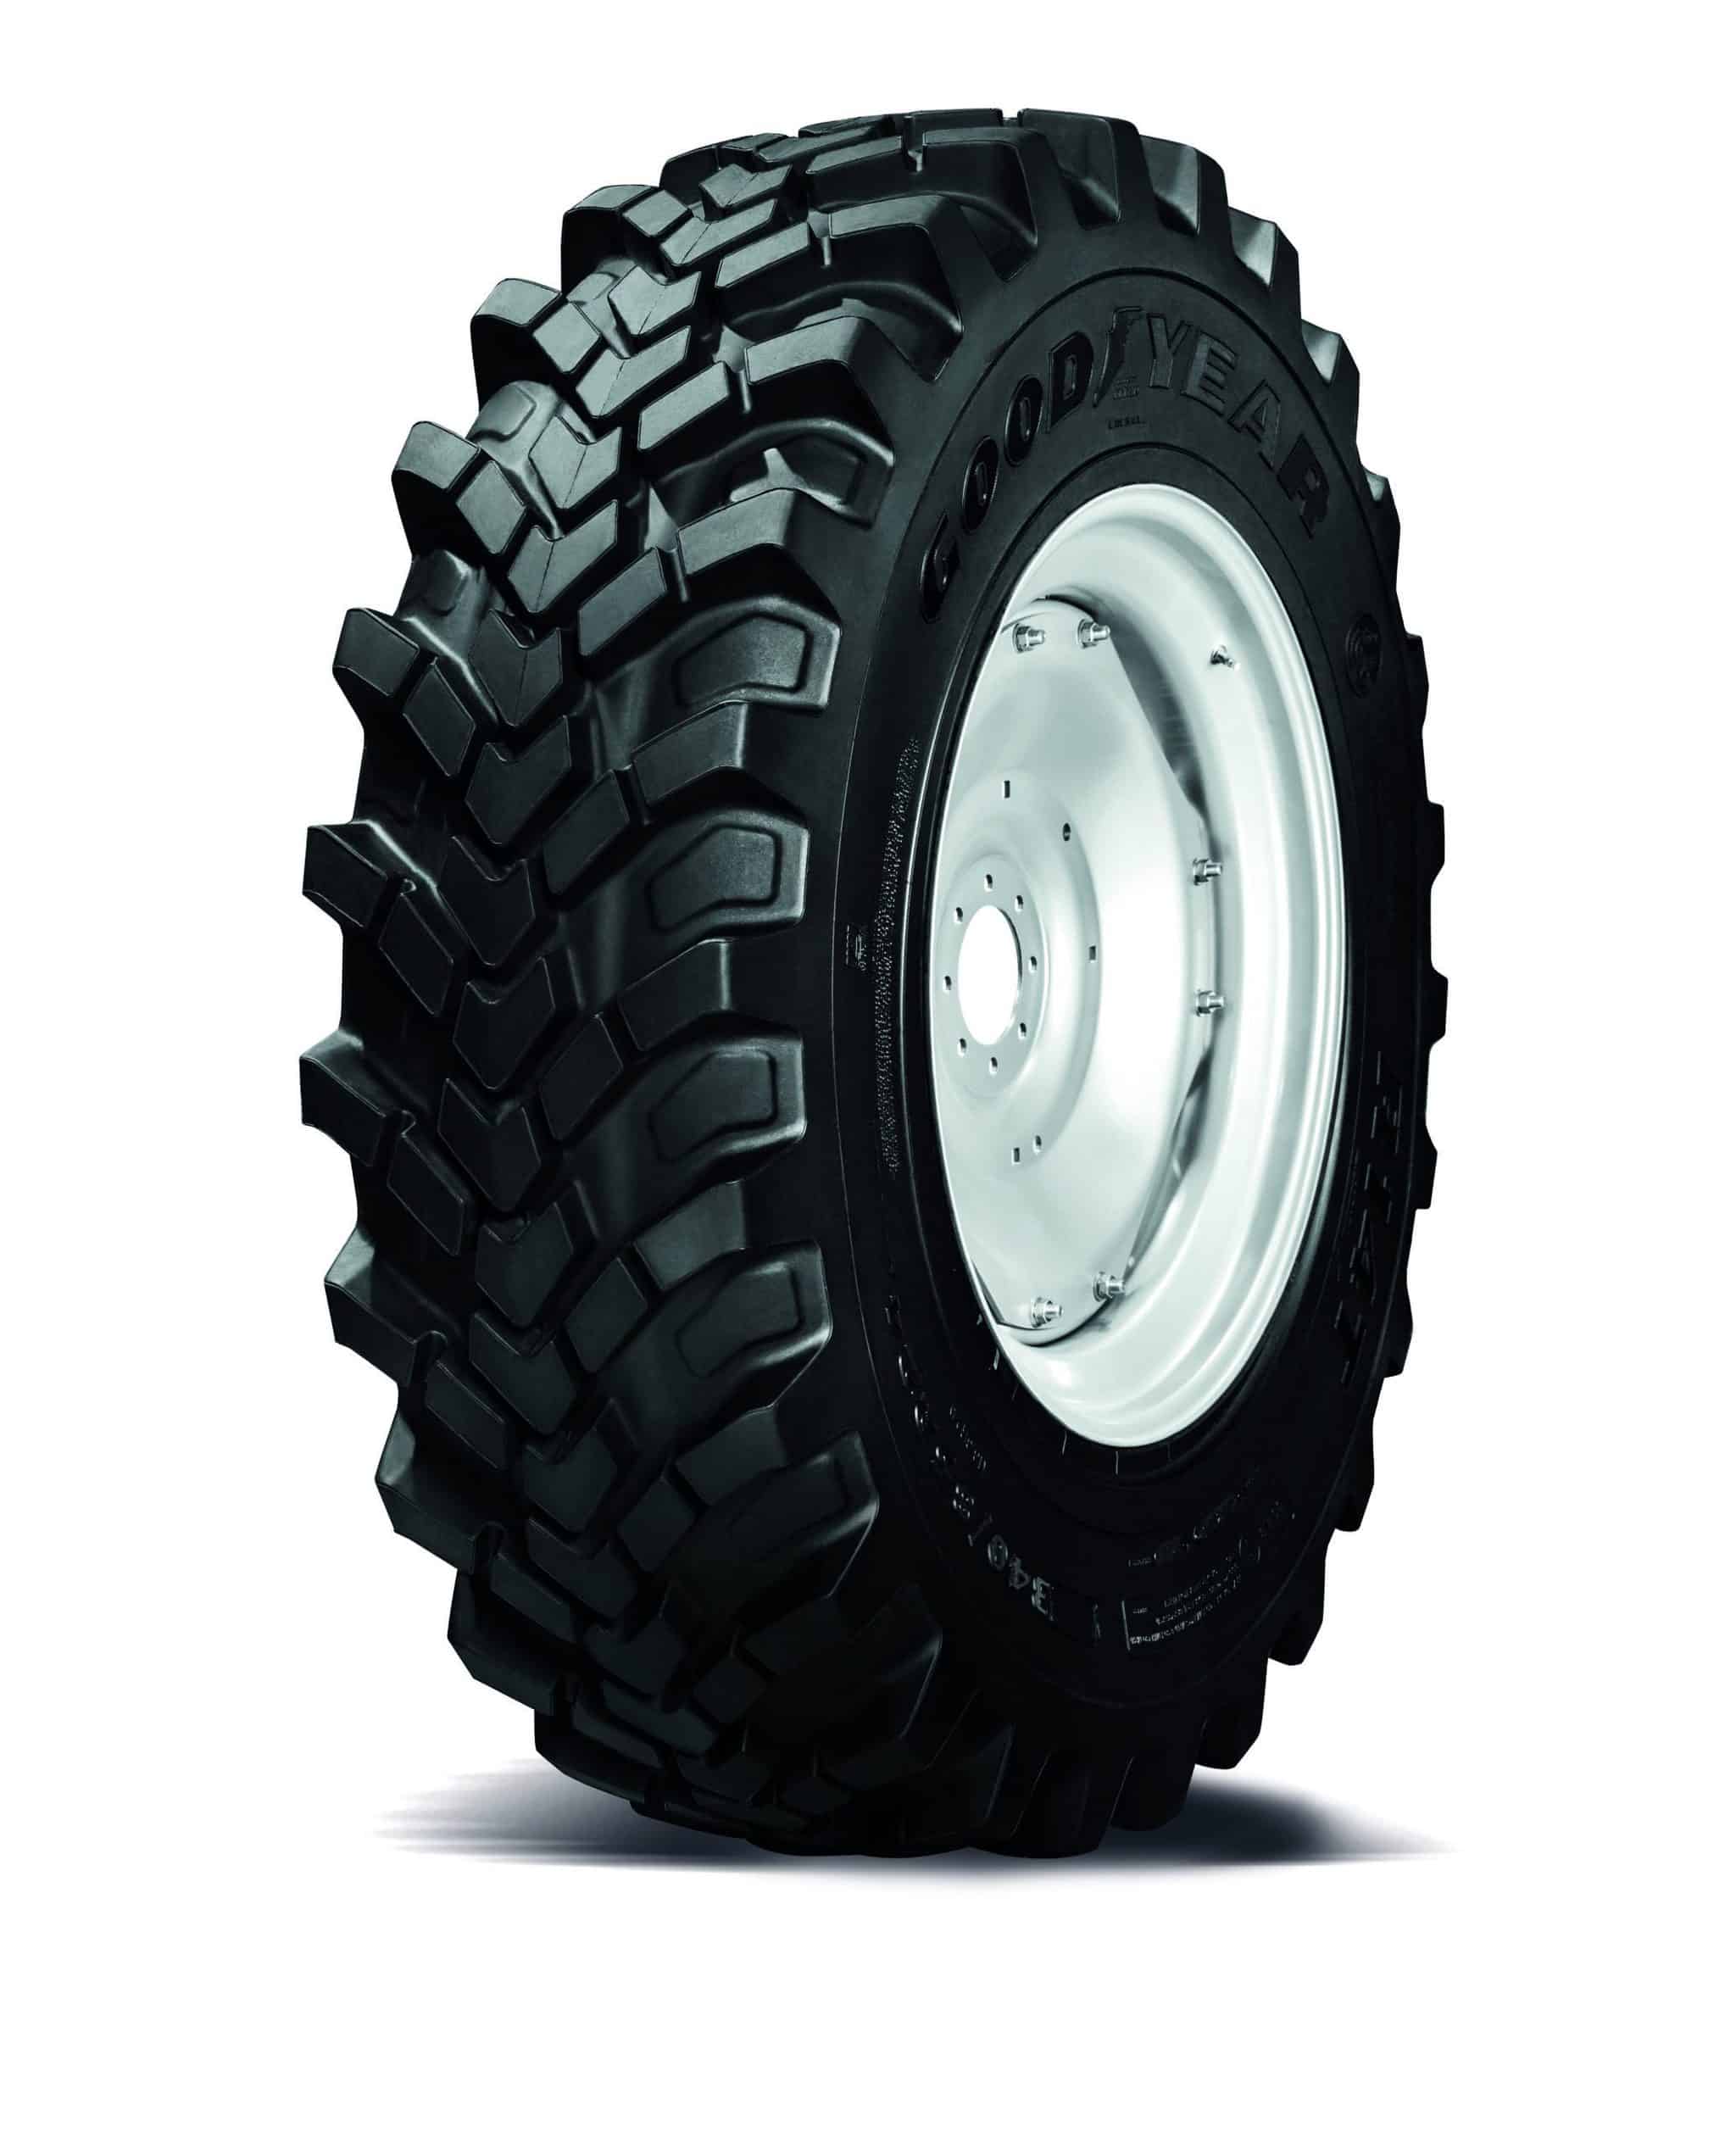 Goodyear launches innovative R14